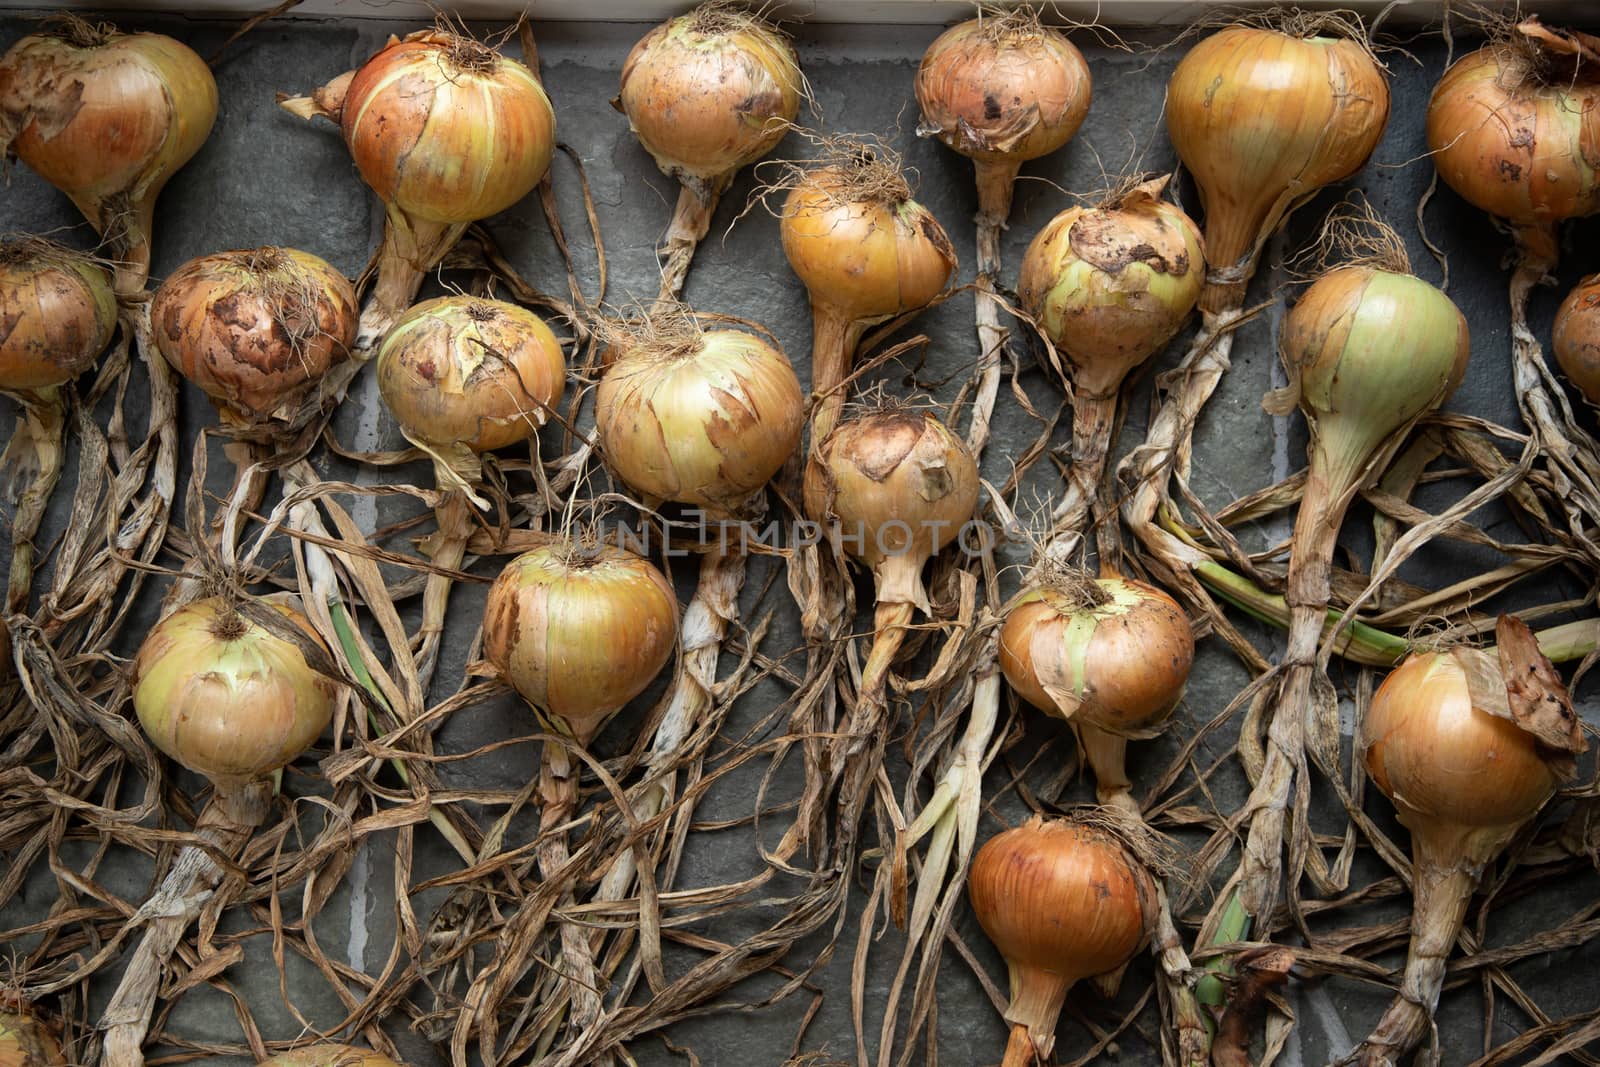 Onions harvested in autumn and laid out to dry,  by kgboxford